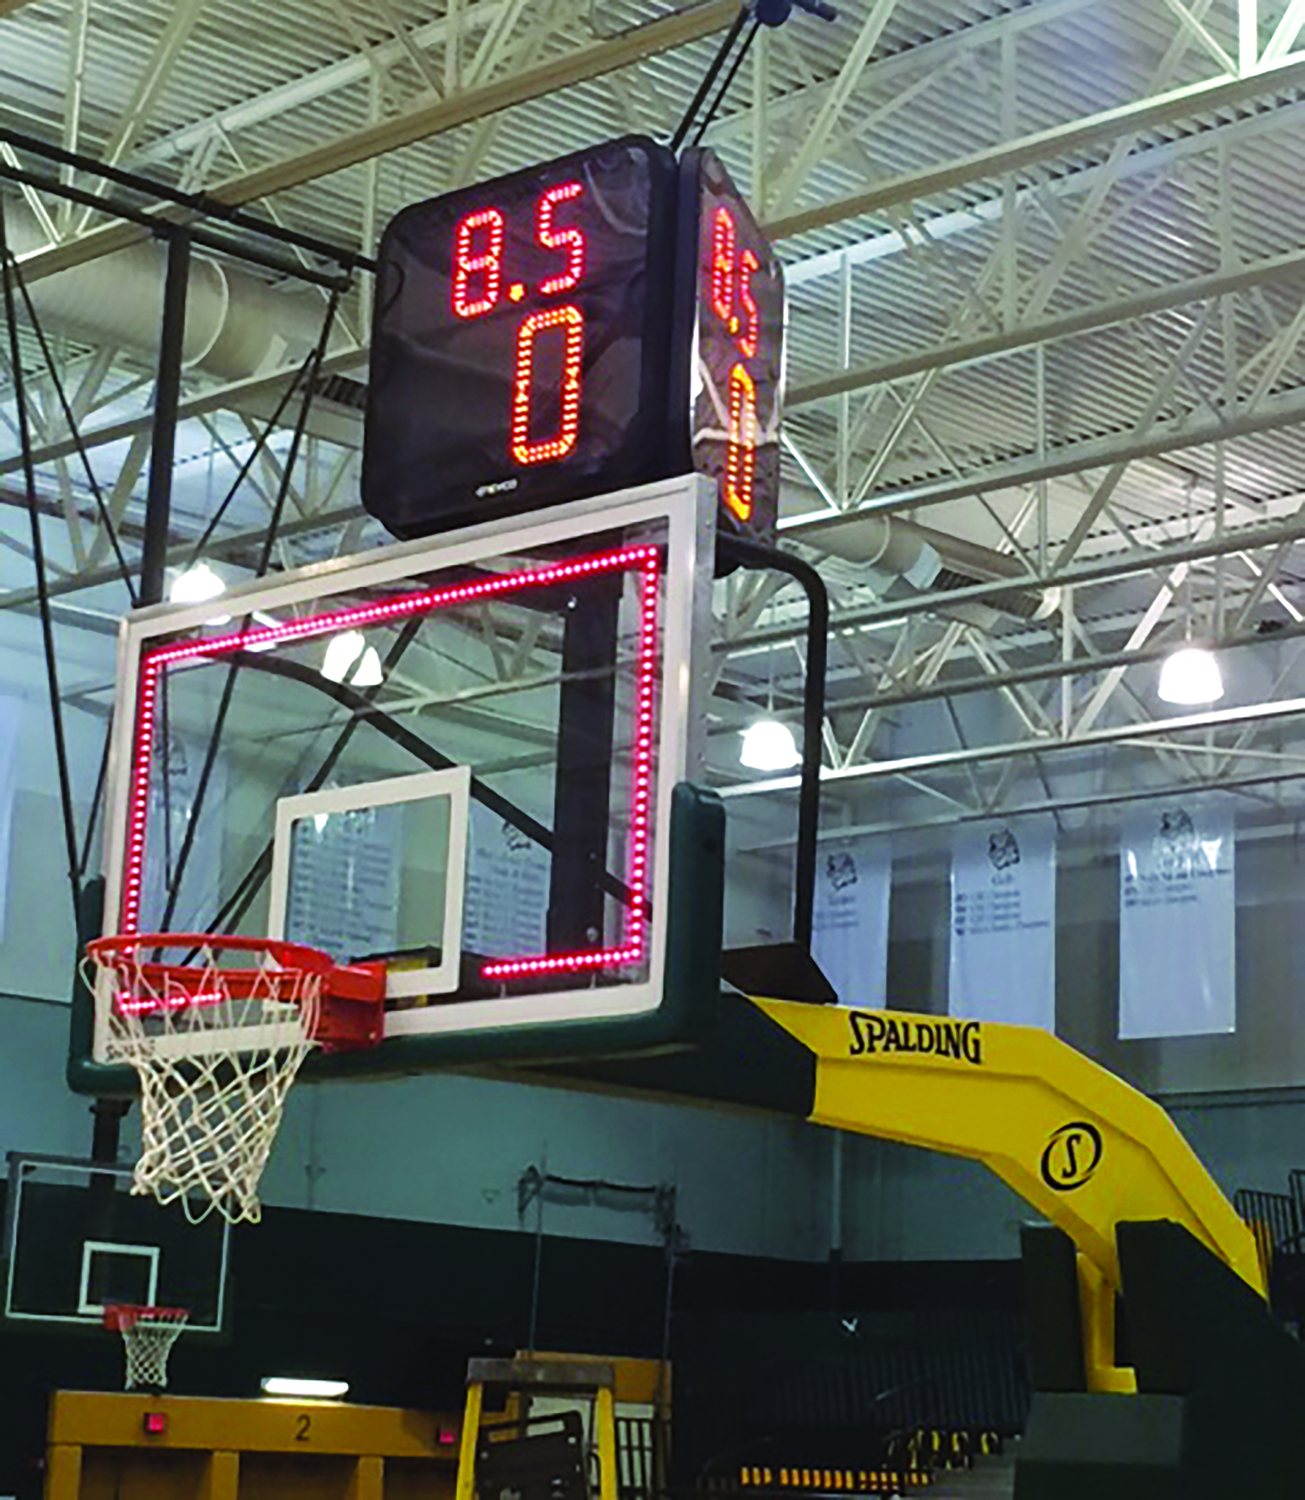 Scoreboards suitable for each sport and facility